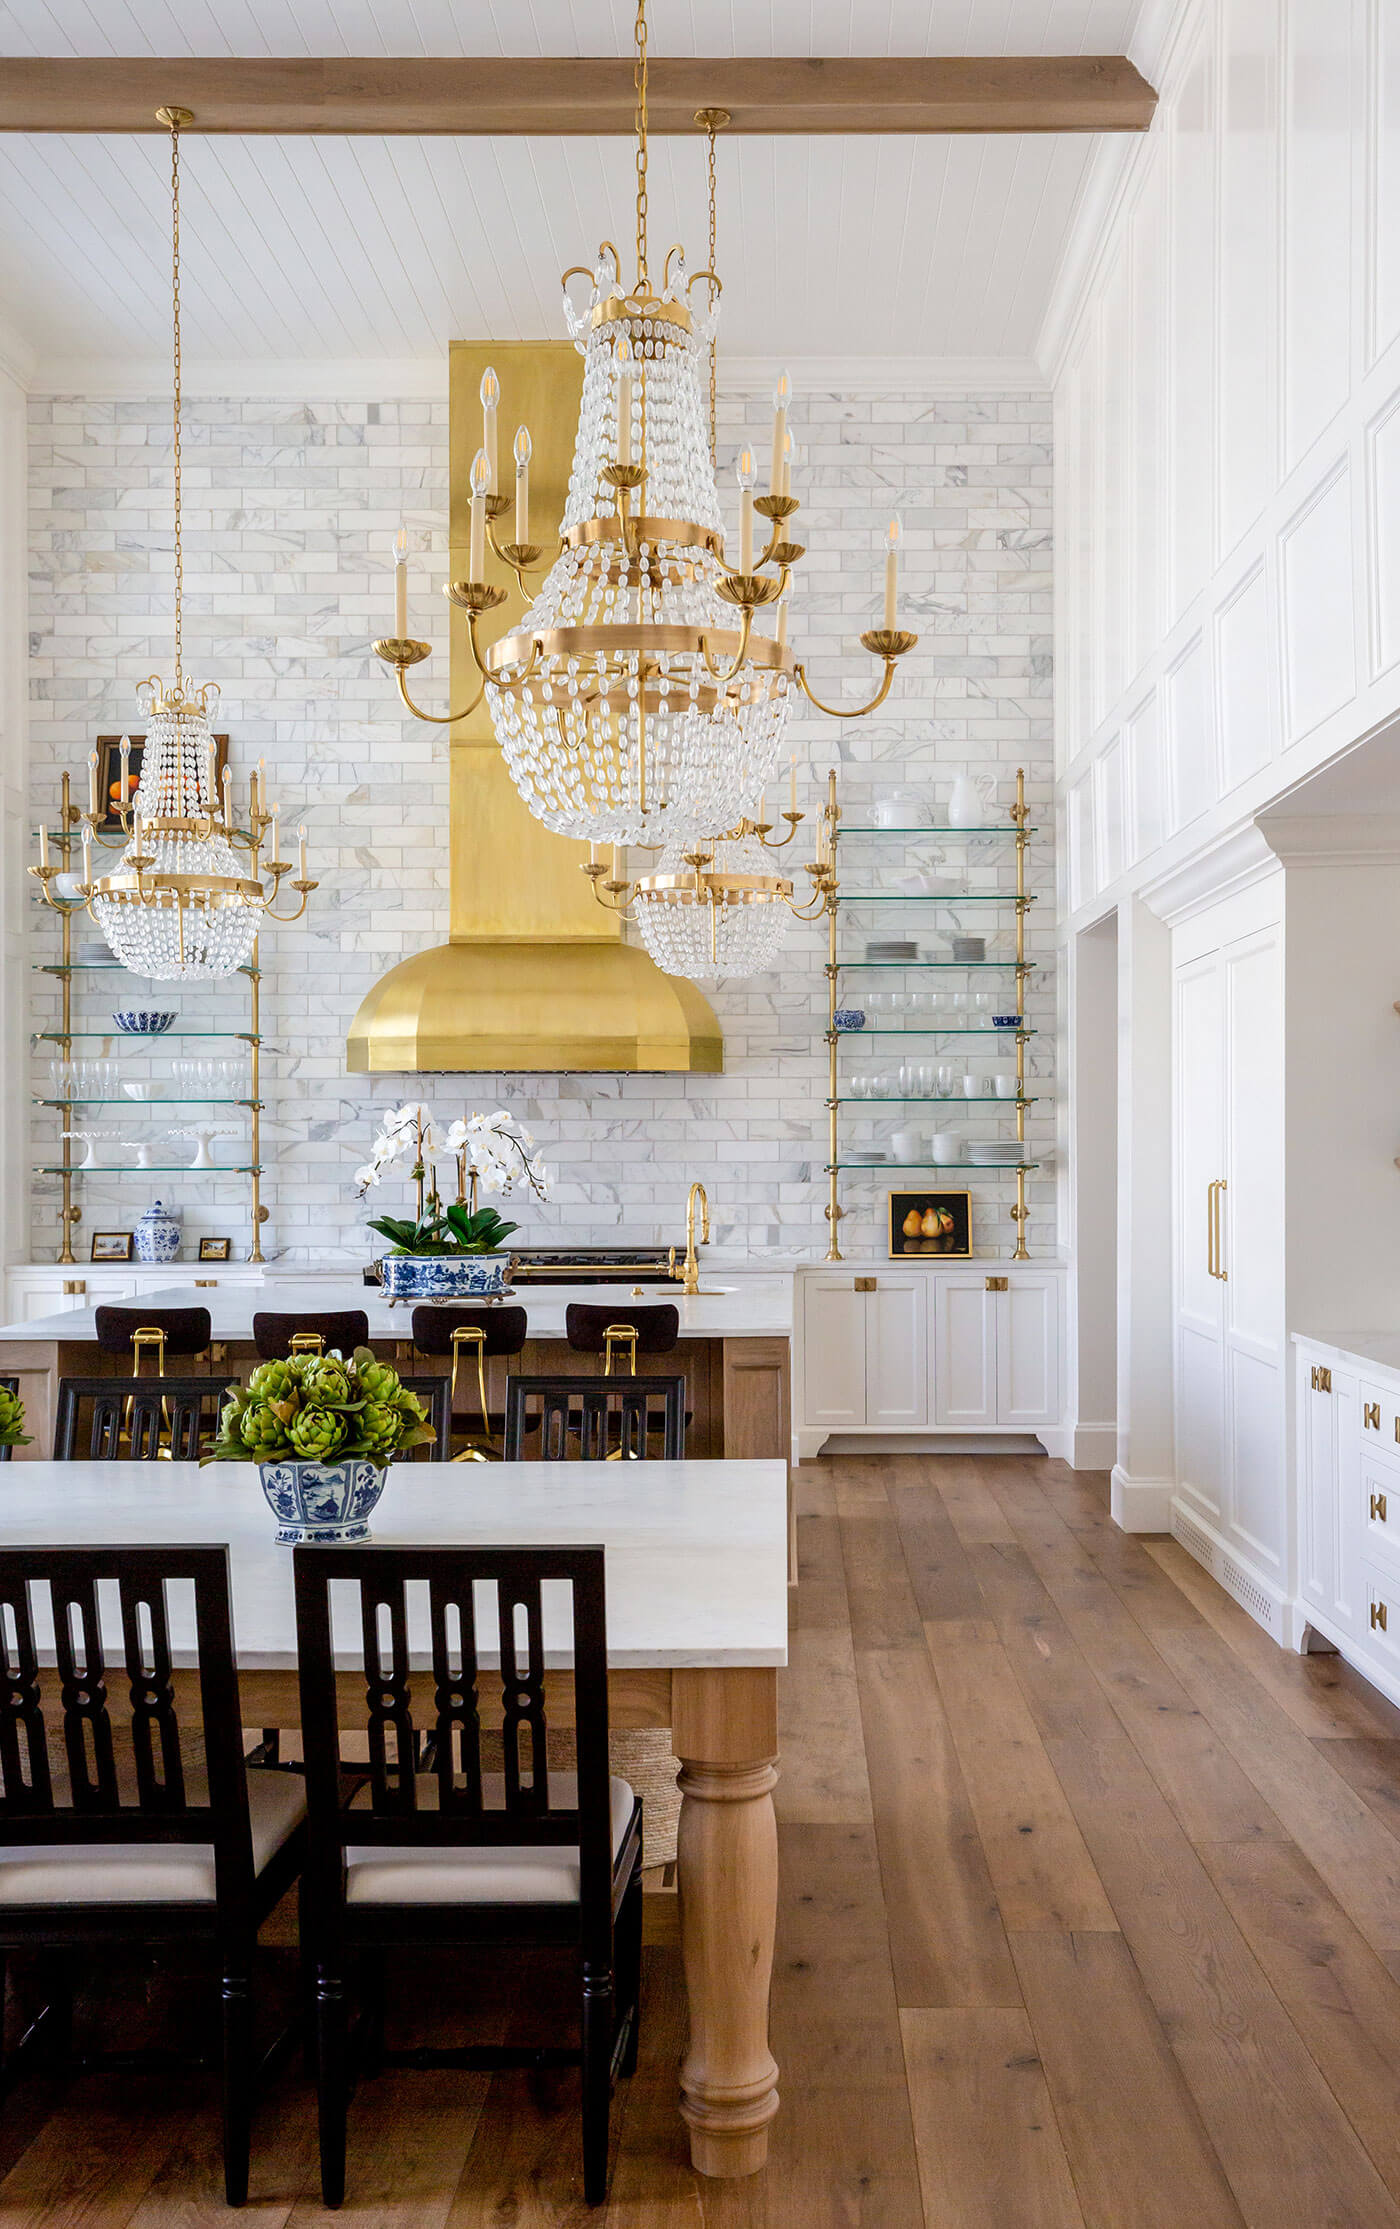 Inside beautiful kitchen with two stories, large chandeliers and tall backsplash